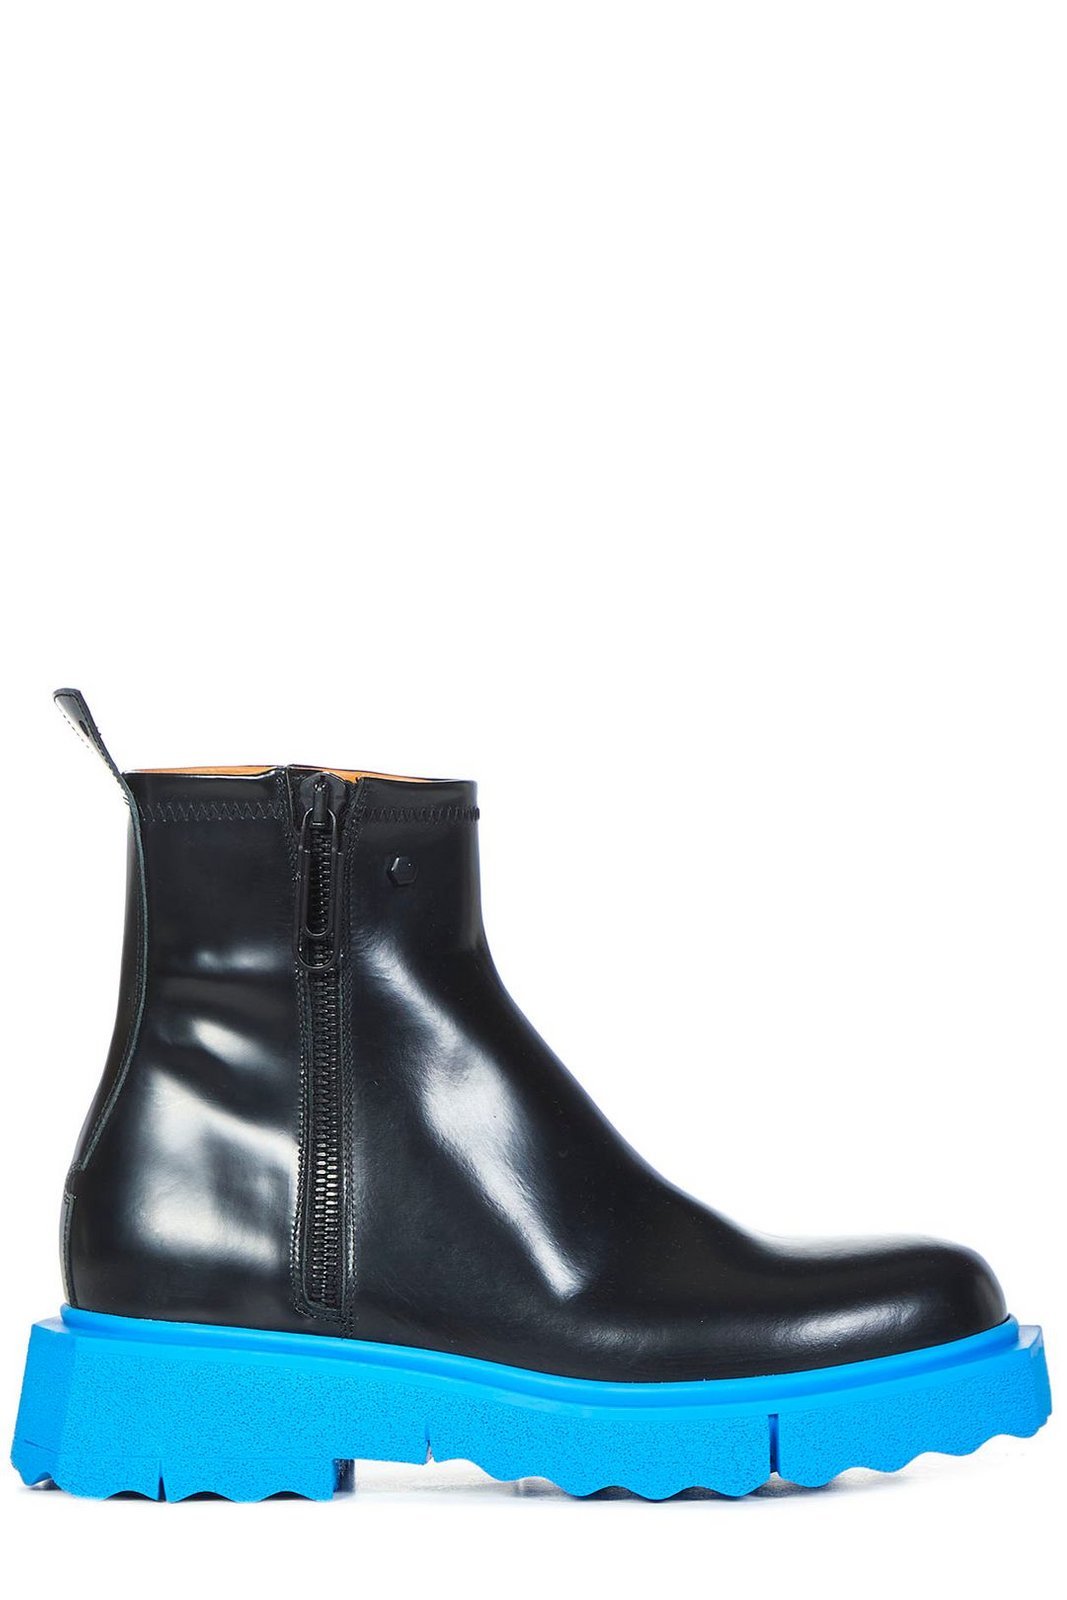 Off-White Sponge-Sole High Ankle Boots